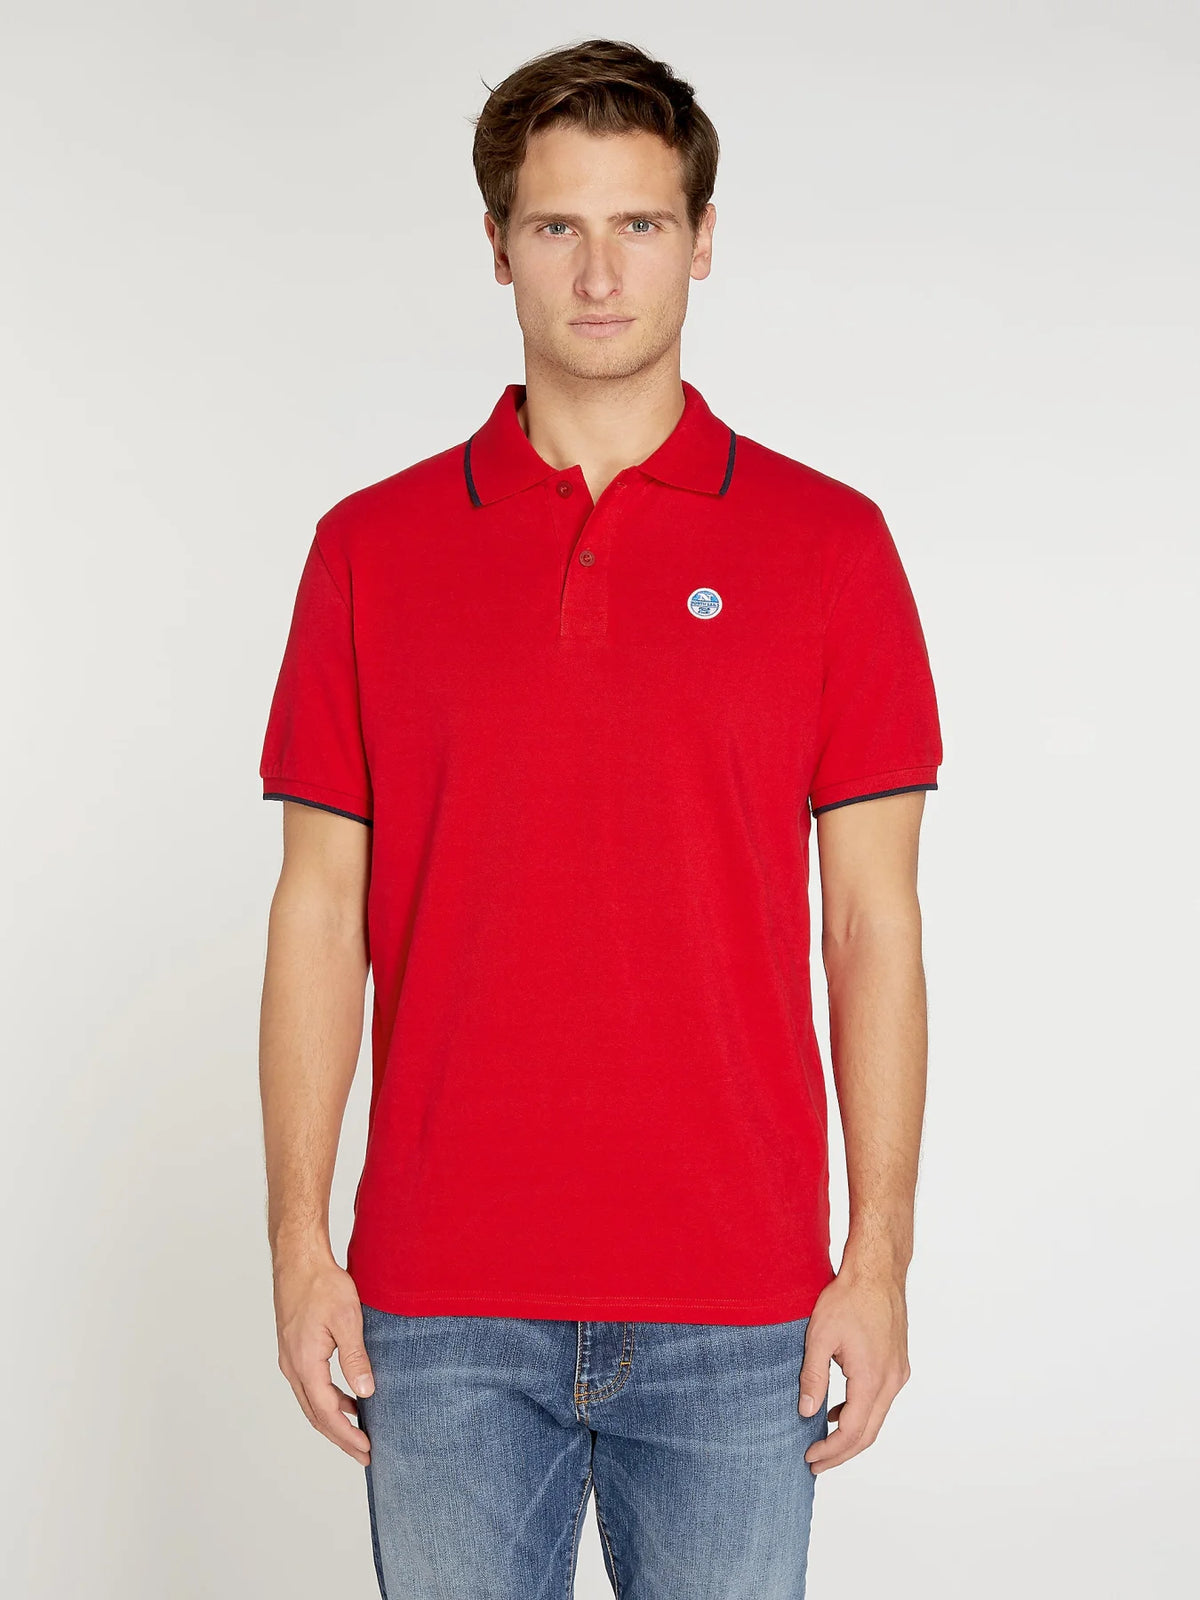 North Sails Cotton Pique Polo Shirt Red / S / Legacy